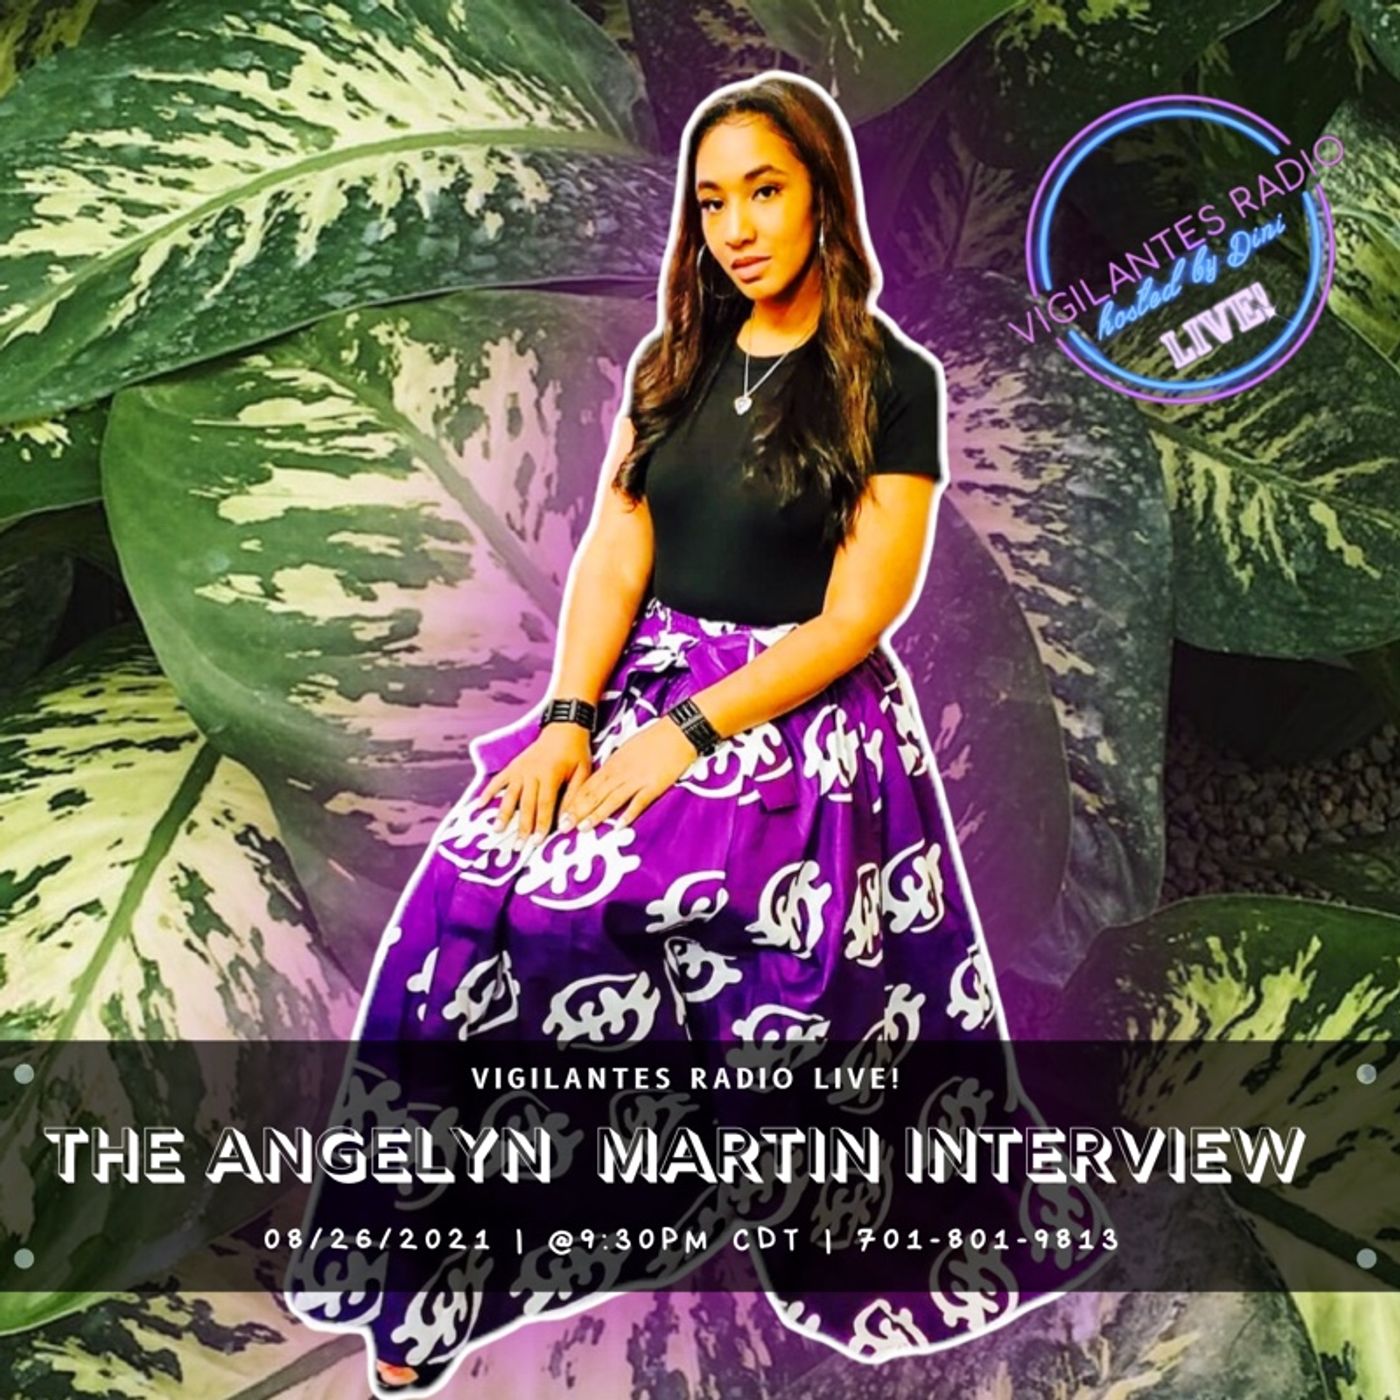 The Angelyn Martin Interview. Image